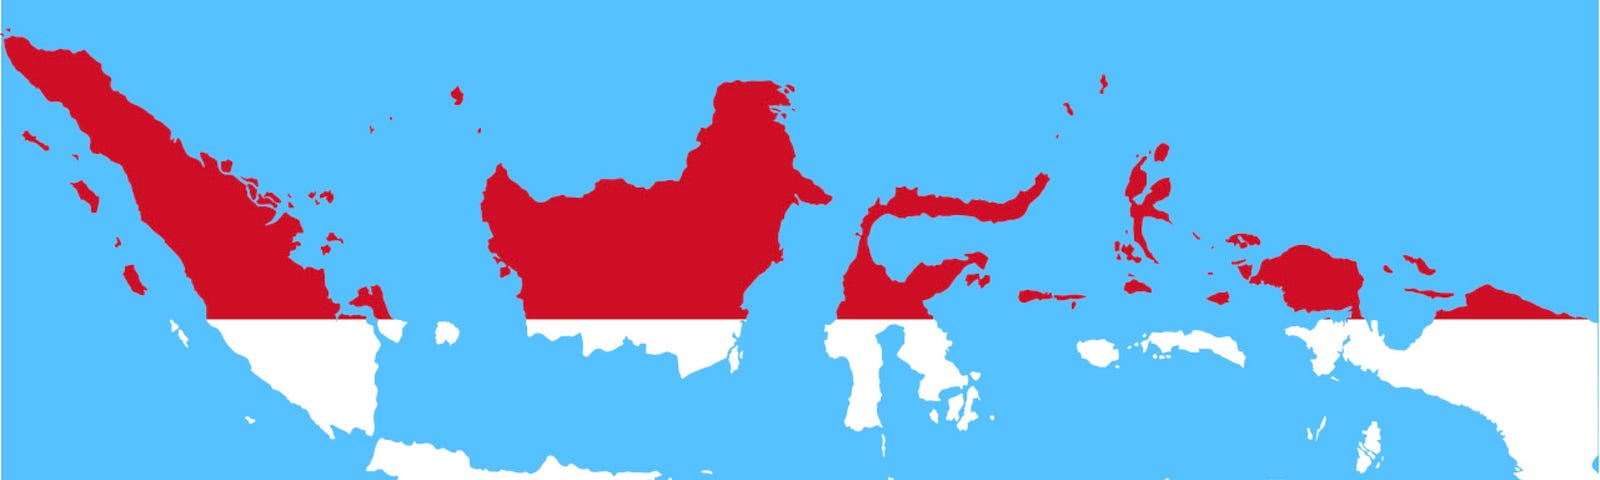 IMAGE: A map of Indonesia with the red and white colors of its flag on a blue background